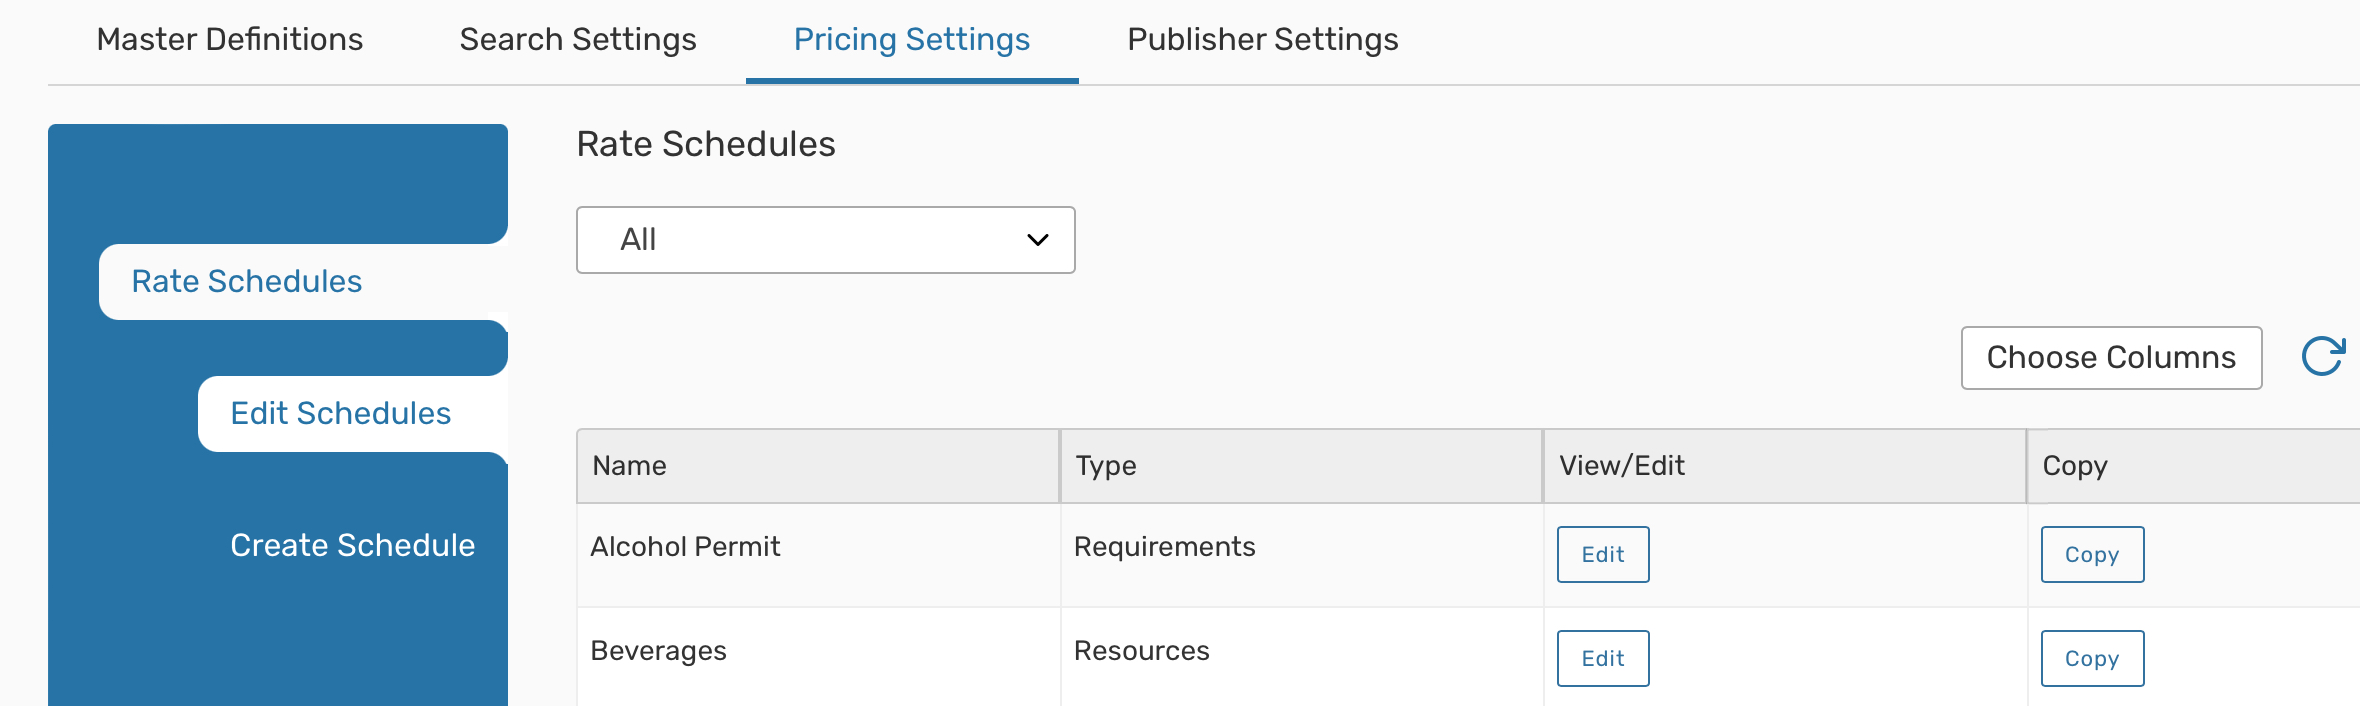 Rate Schedules are found in the Pricing Settings area of System Settings in 25Live